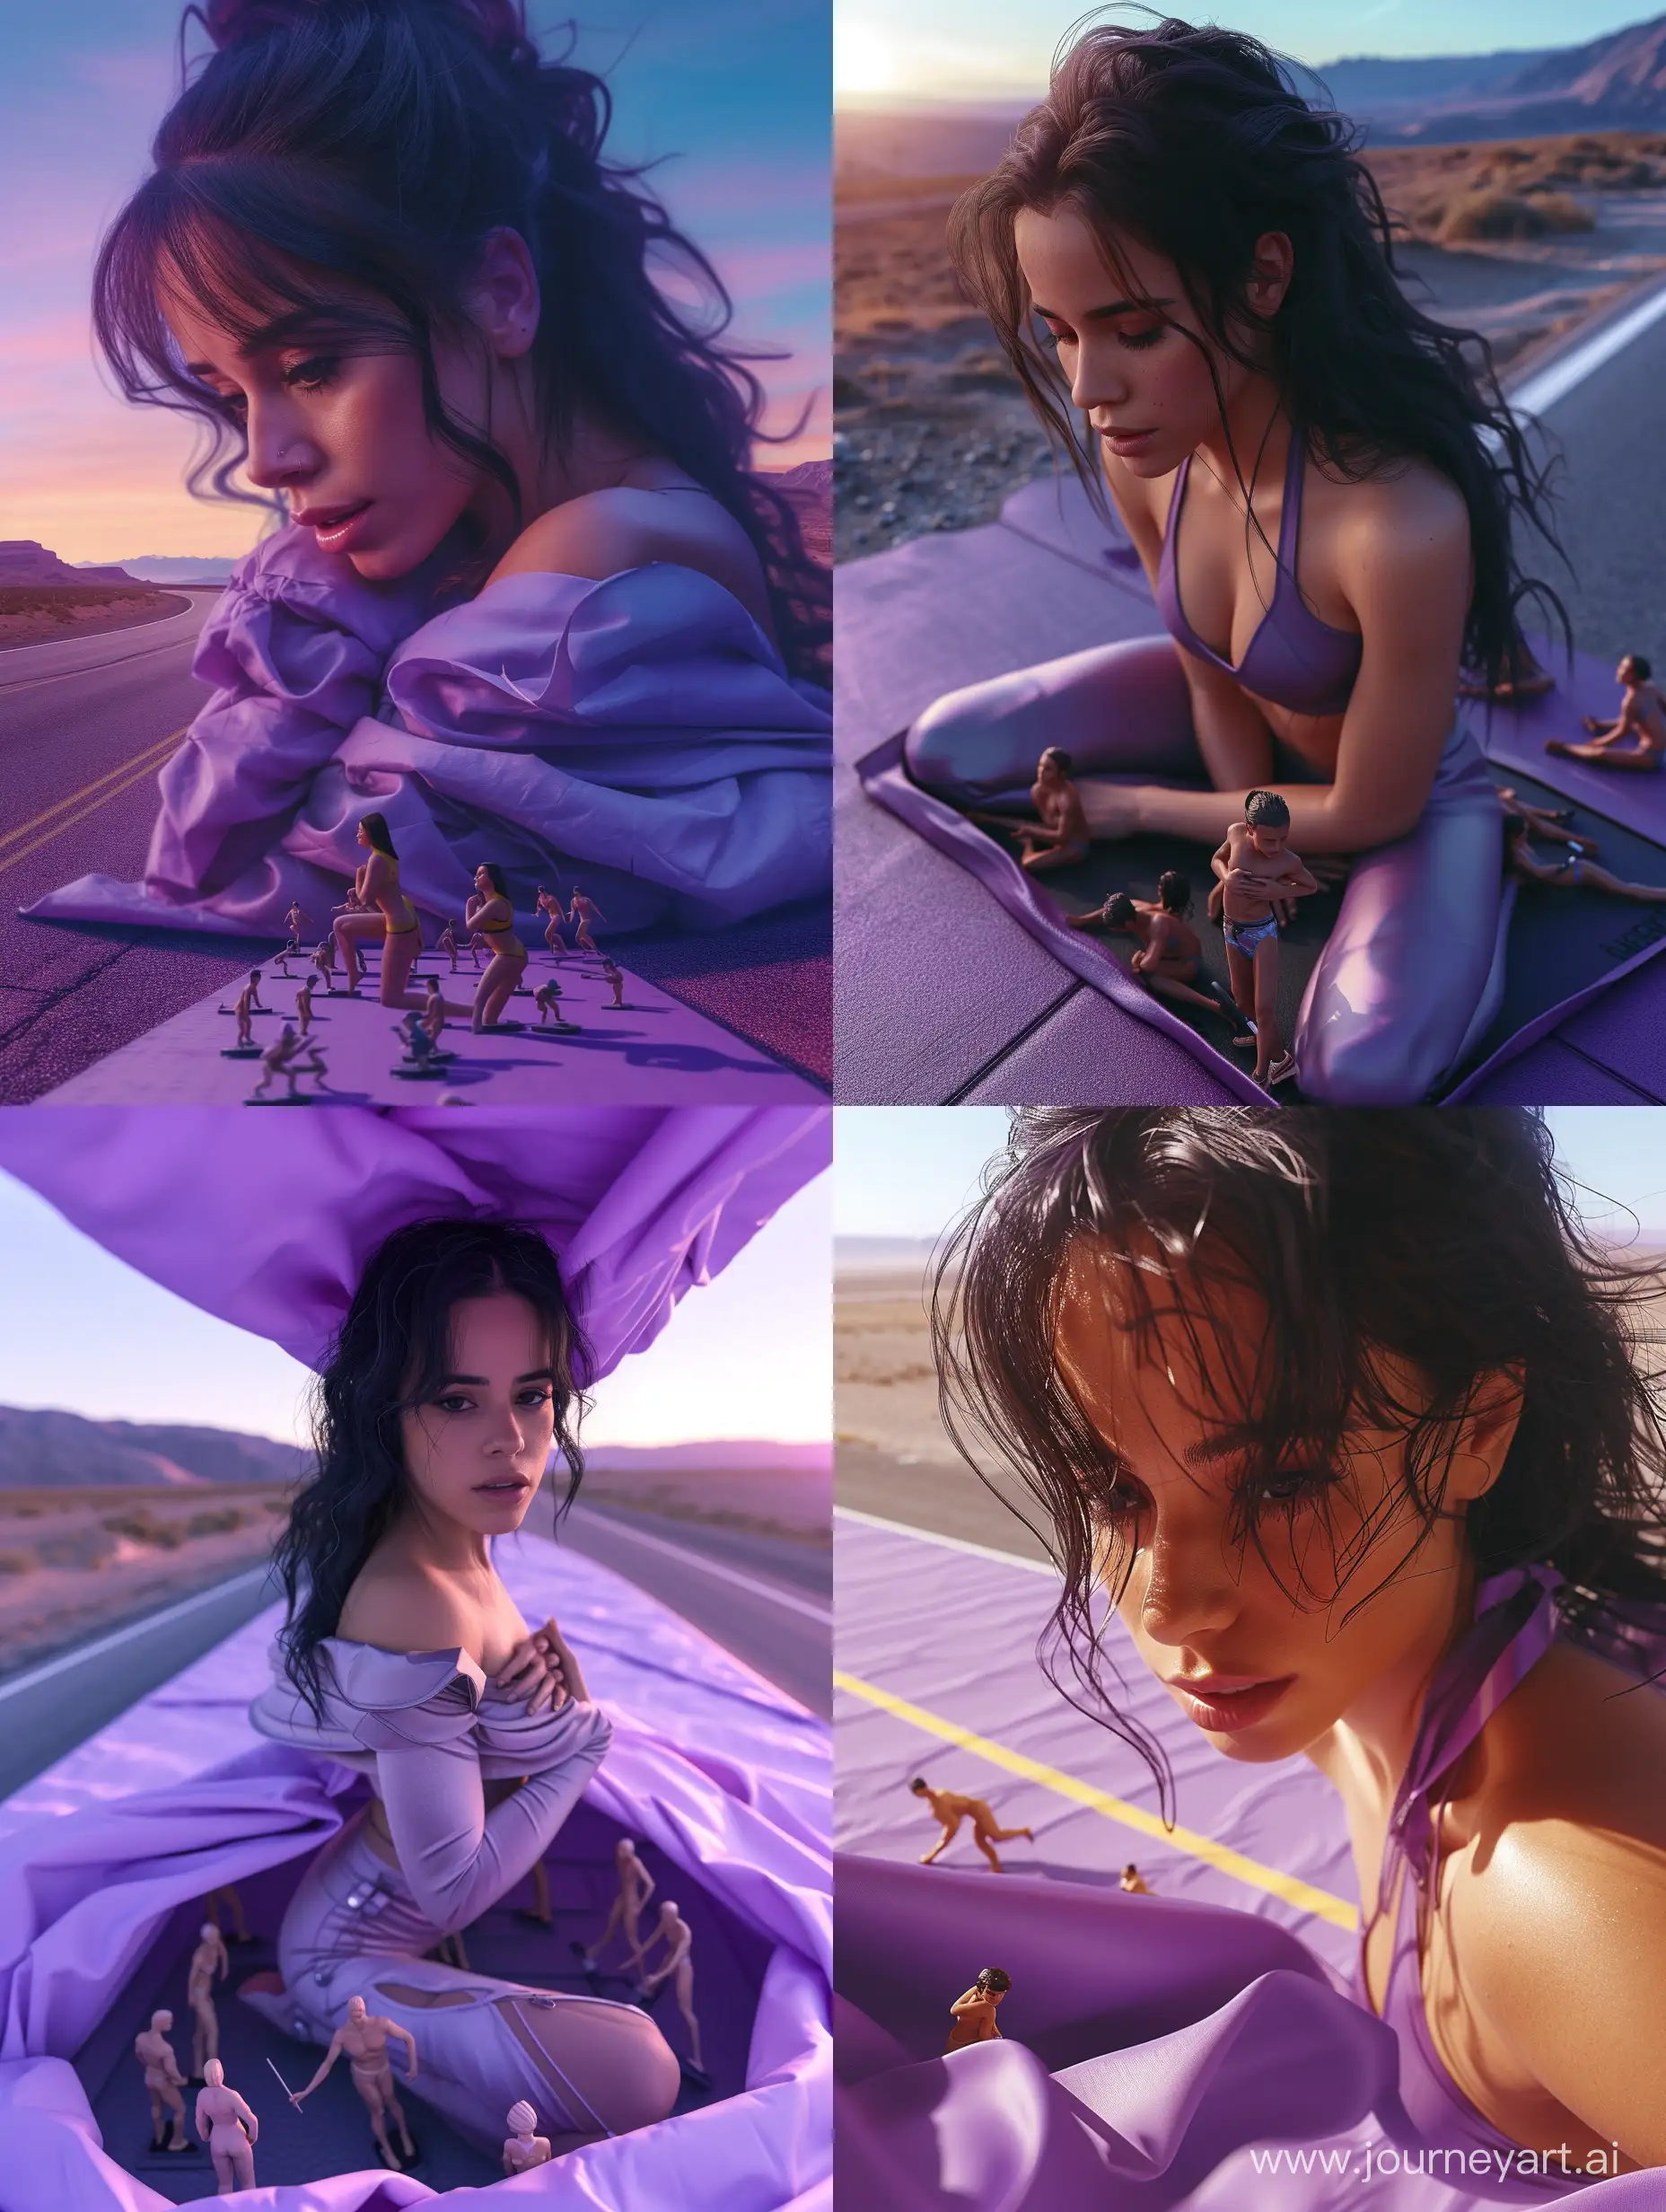  purple sunrise, open road, realistic gian t Camila 'dark-hair' Cabello, wrapping sleek outfit, she is on a fitness mat, looking at herself, close-up view, a group of miniature men below, a miniature man is trapped within Camila